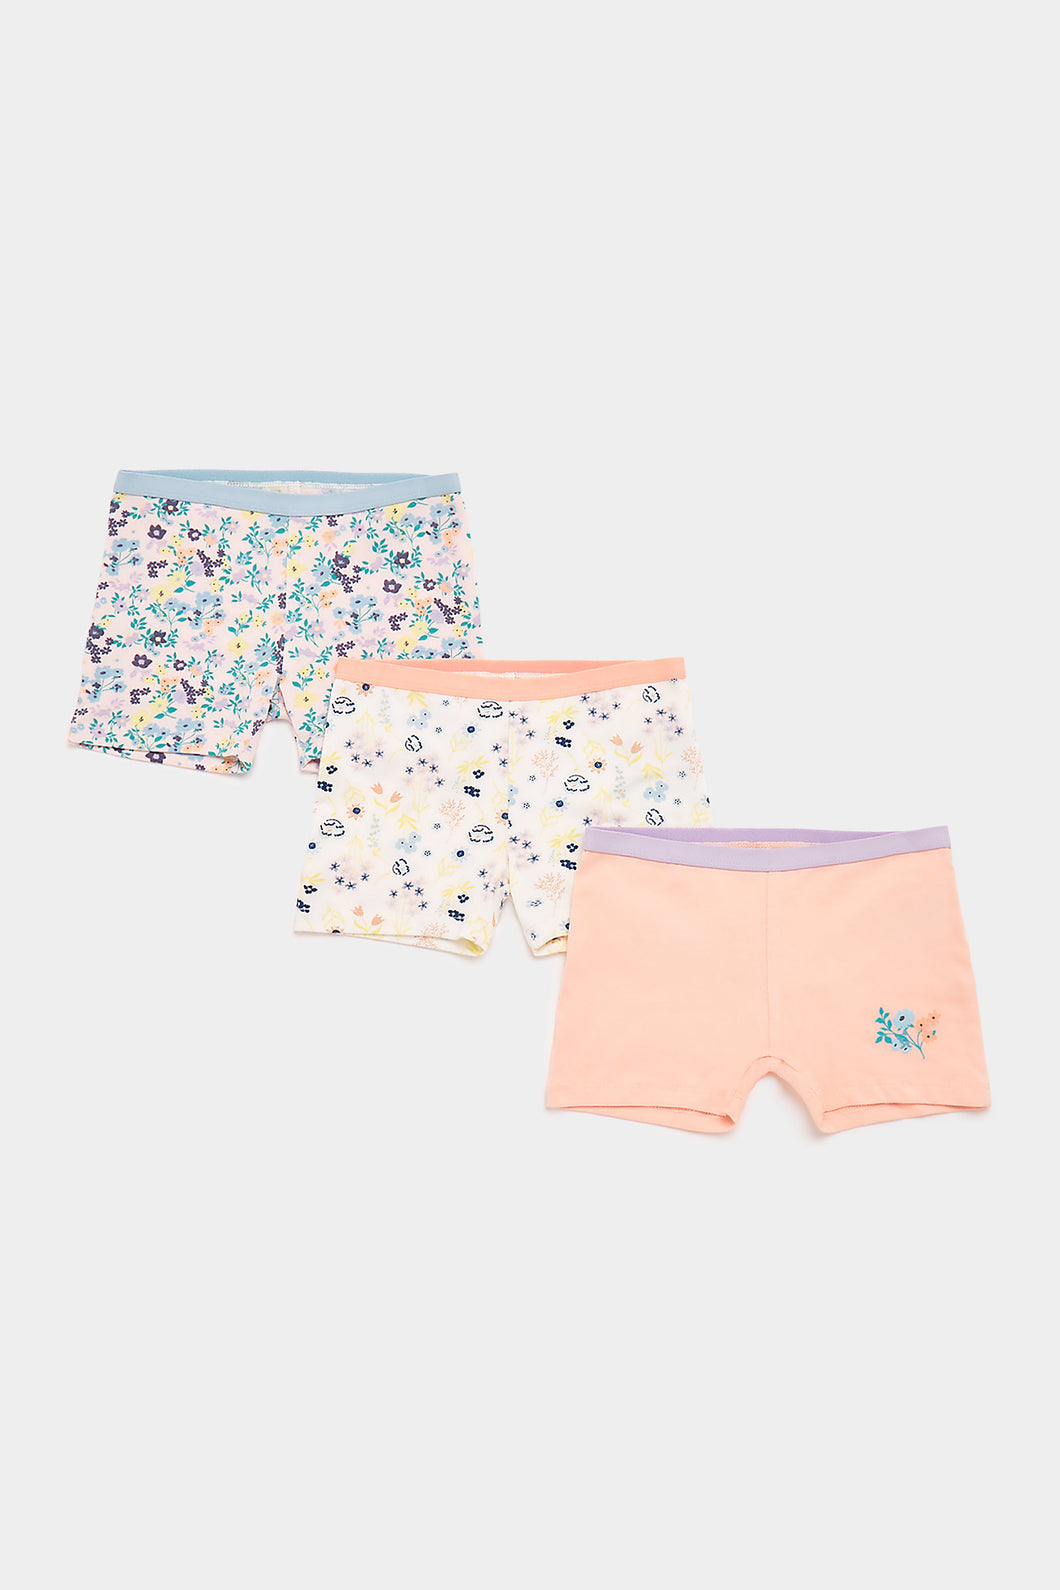 Mothercare Floral Short Briefs - 3 Pack